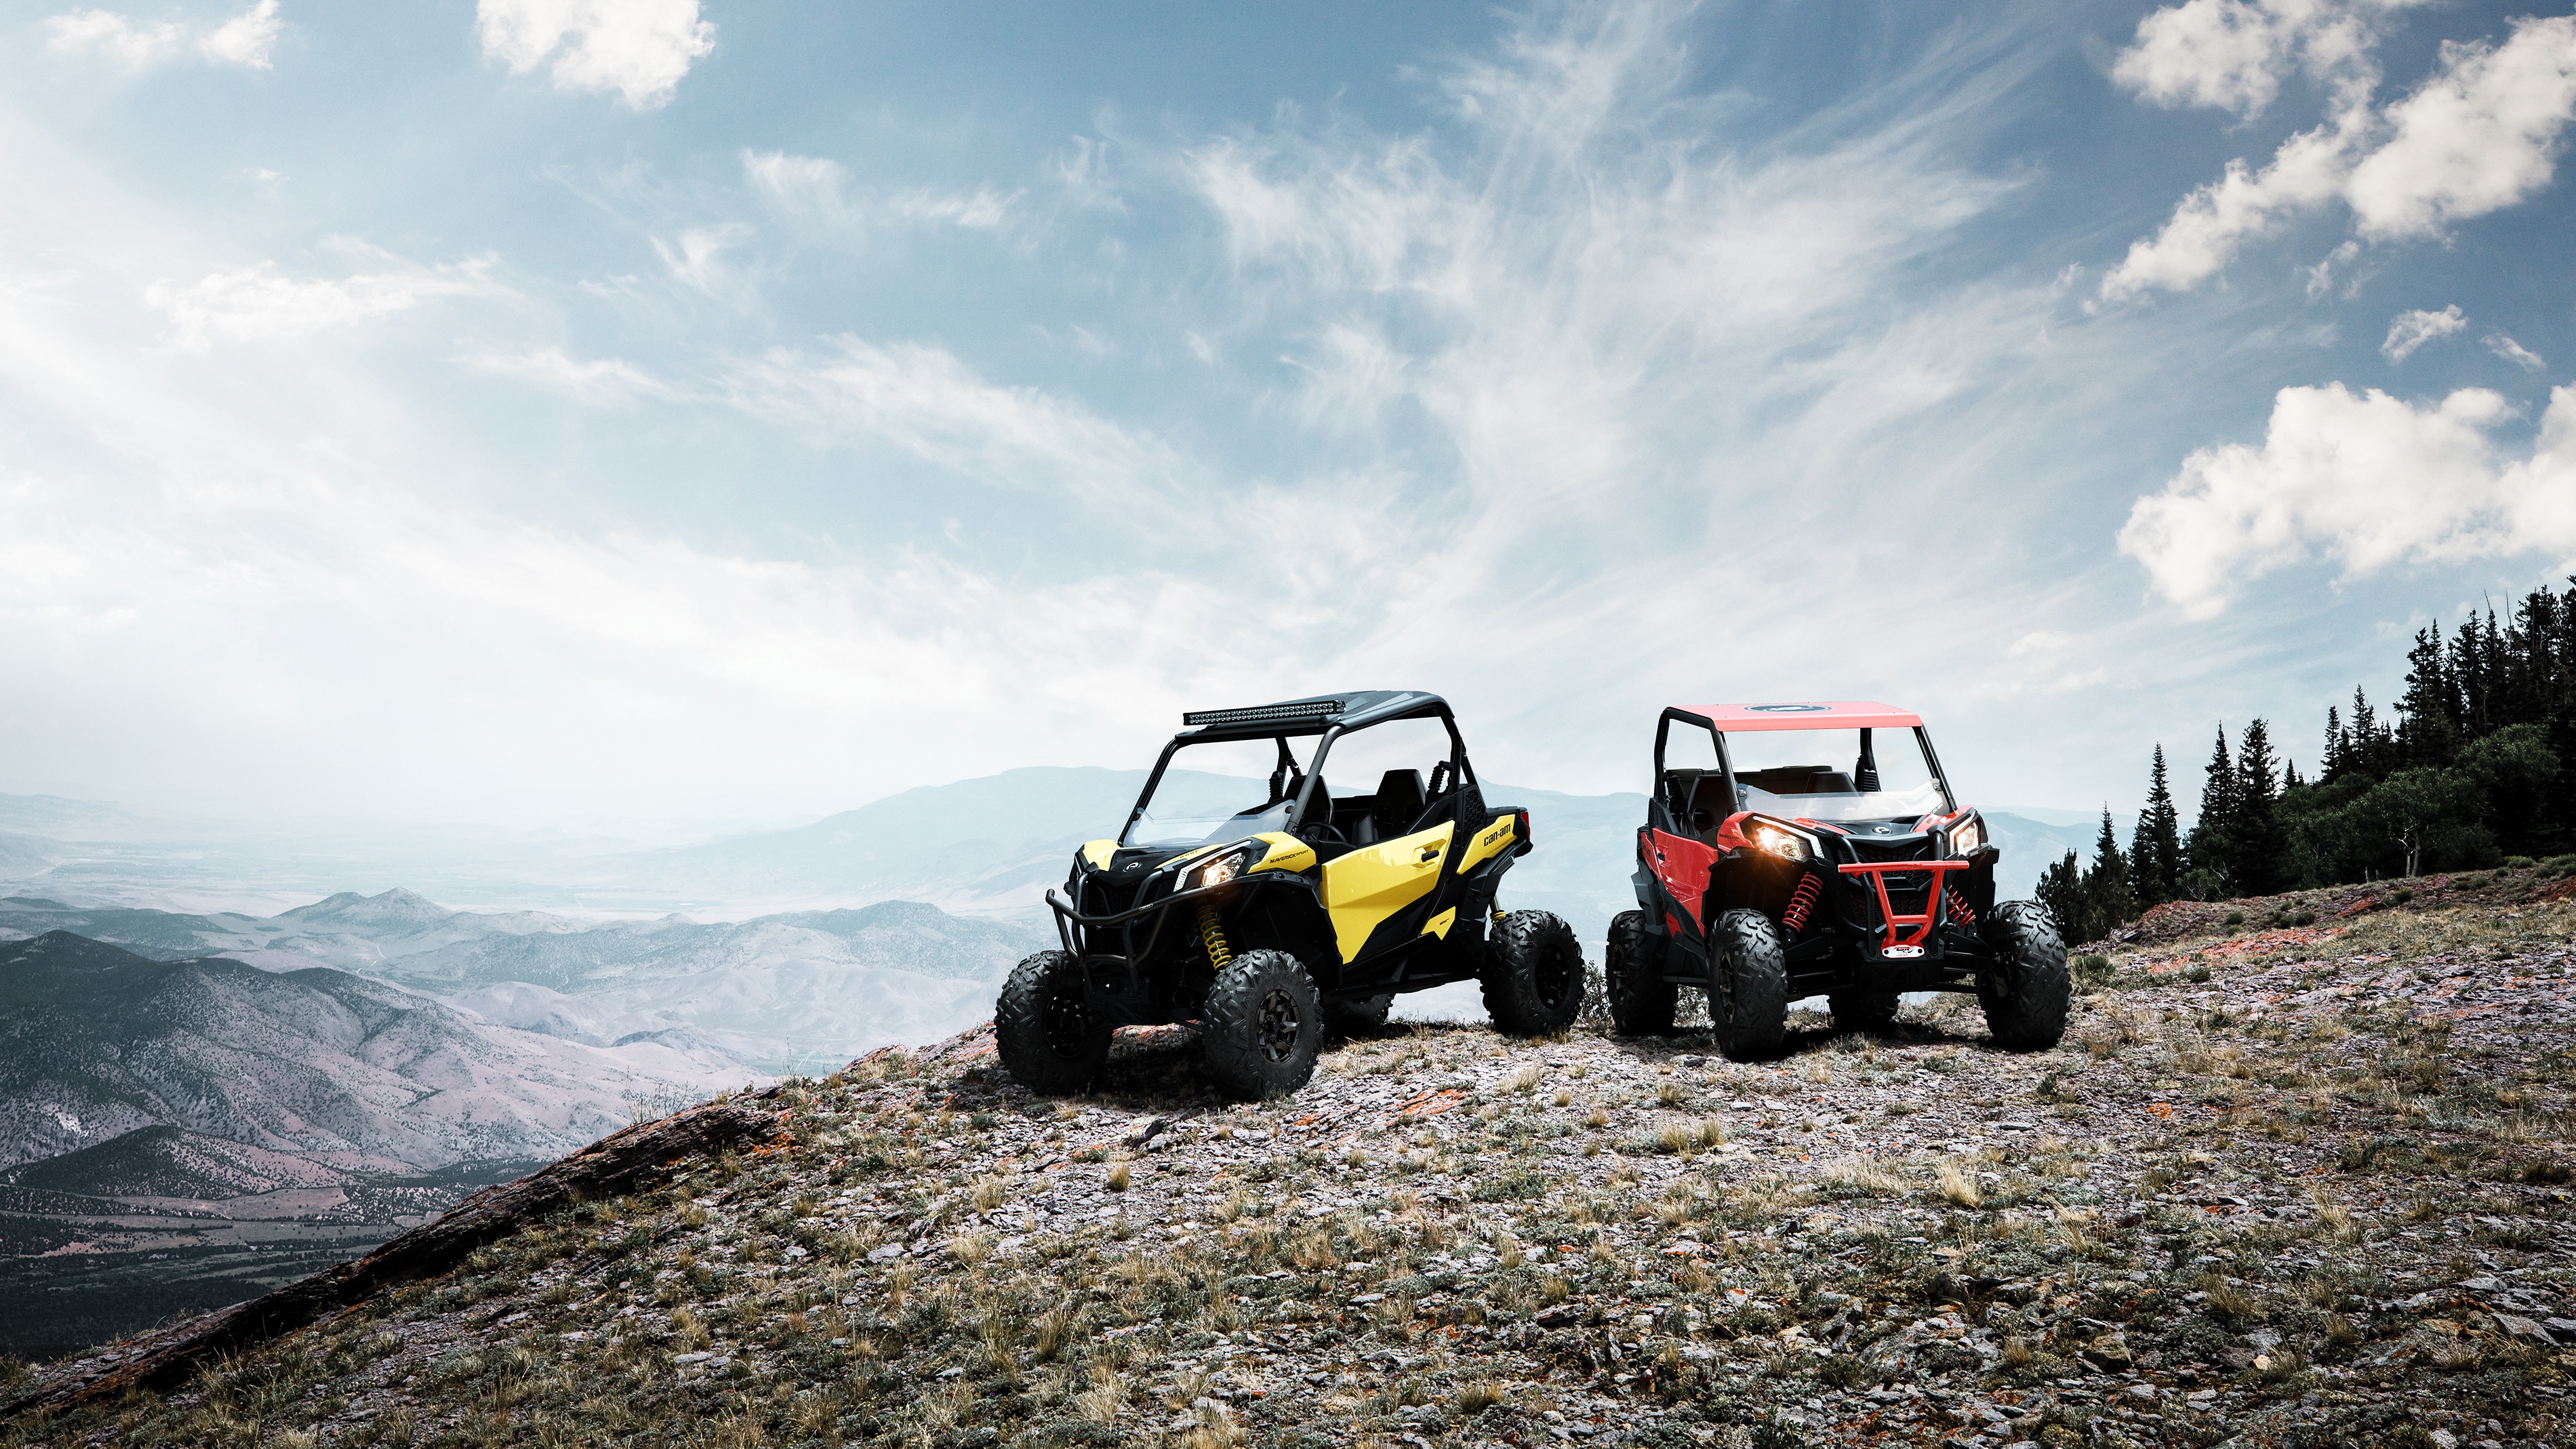 Pair of Can-Am Off-Road side-by-side vehicles on a mountain